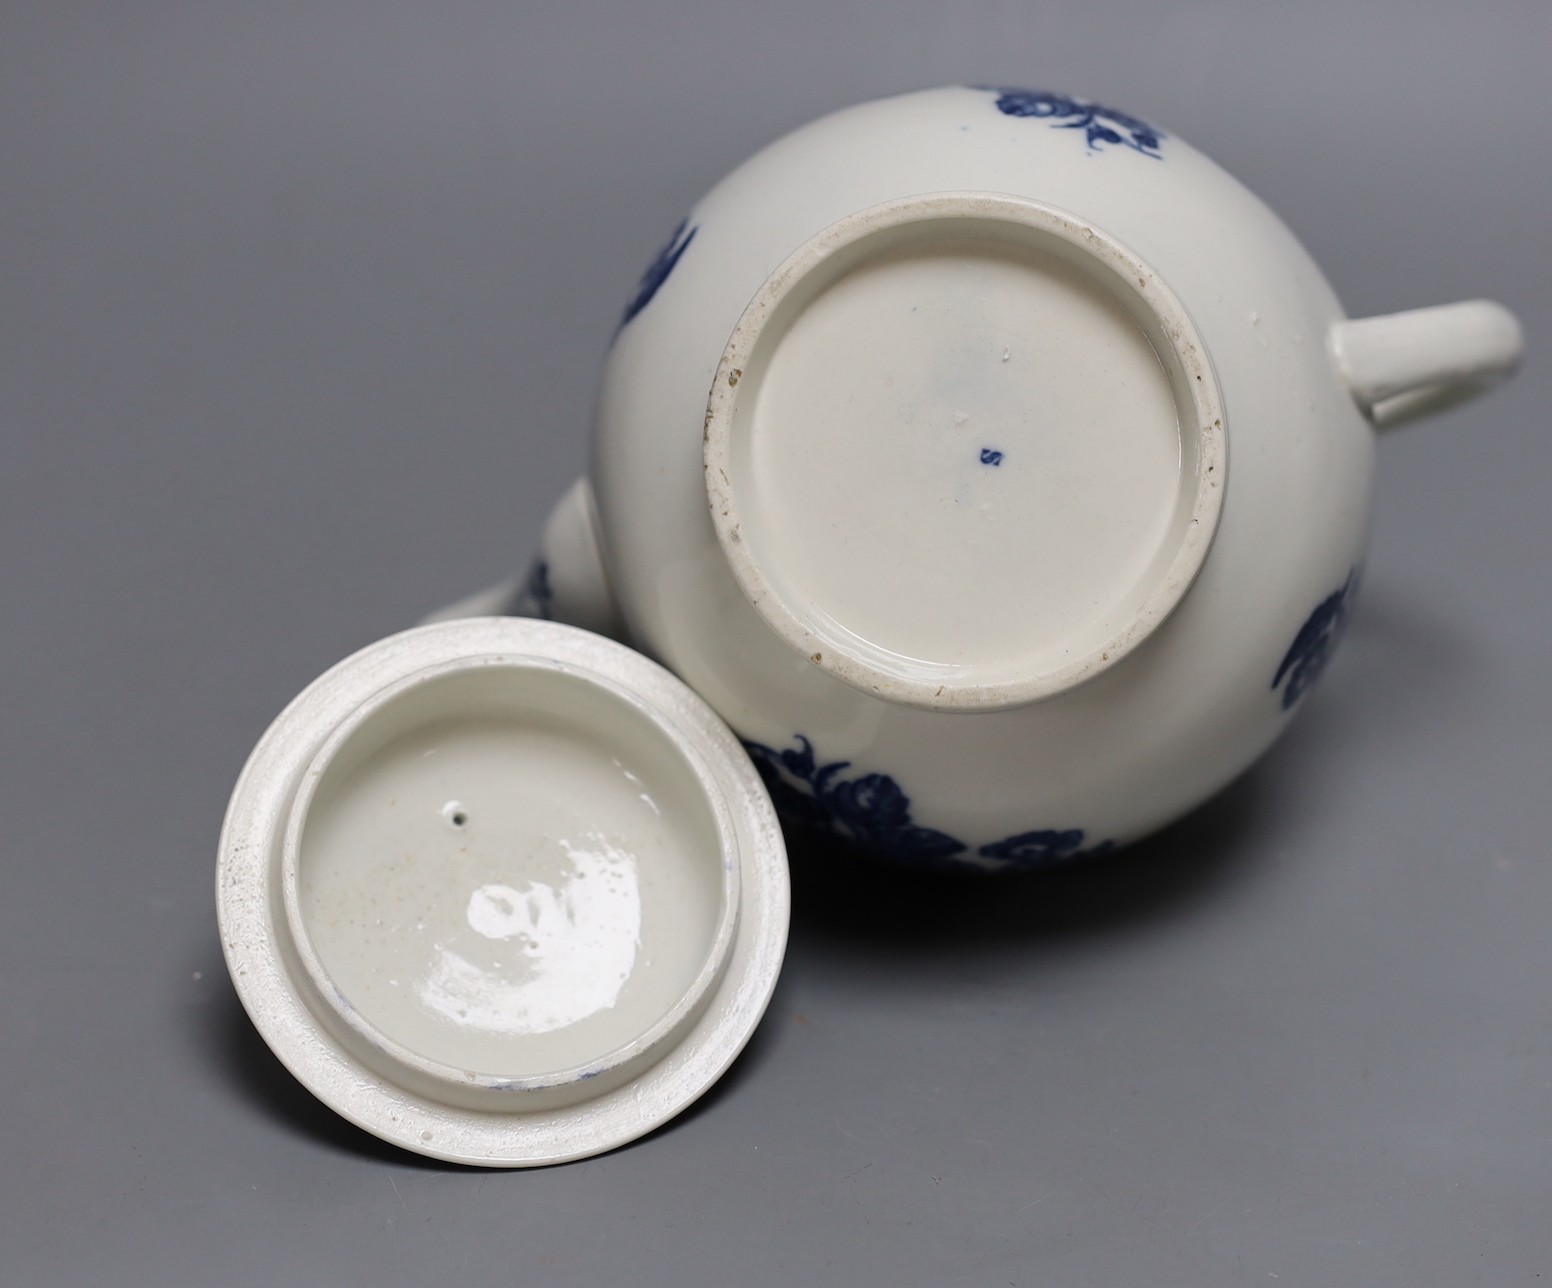 A Caughley teapot and cover printed in underglaze blue with the Three Flowers pattern, S mark in blue to base, 17 cms high